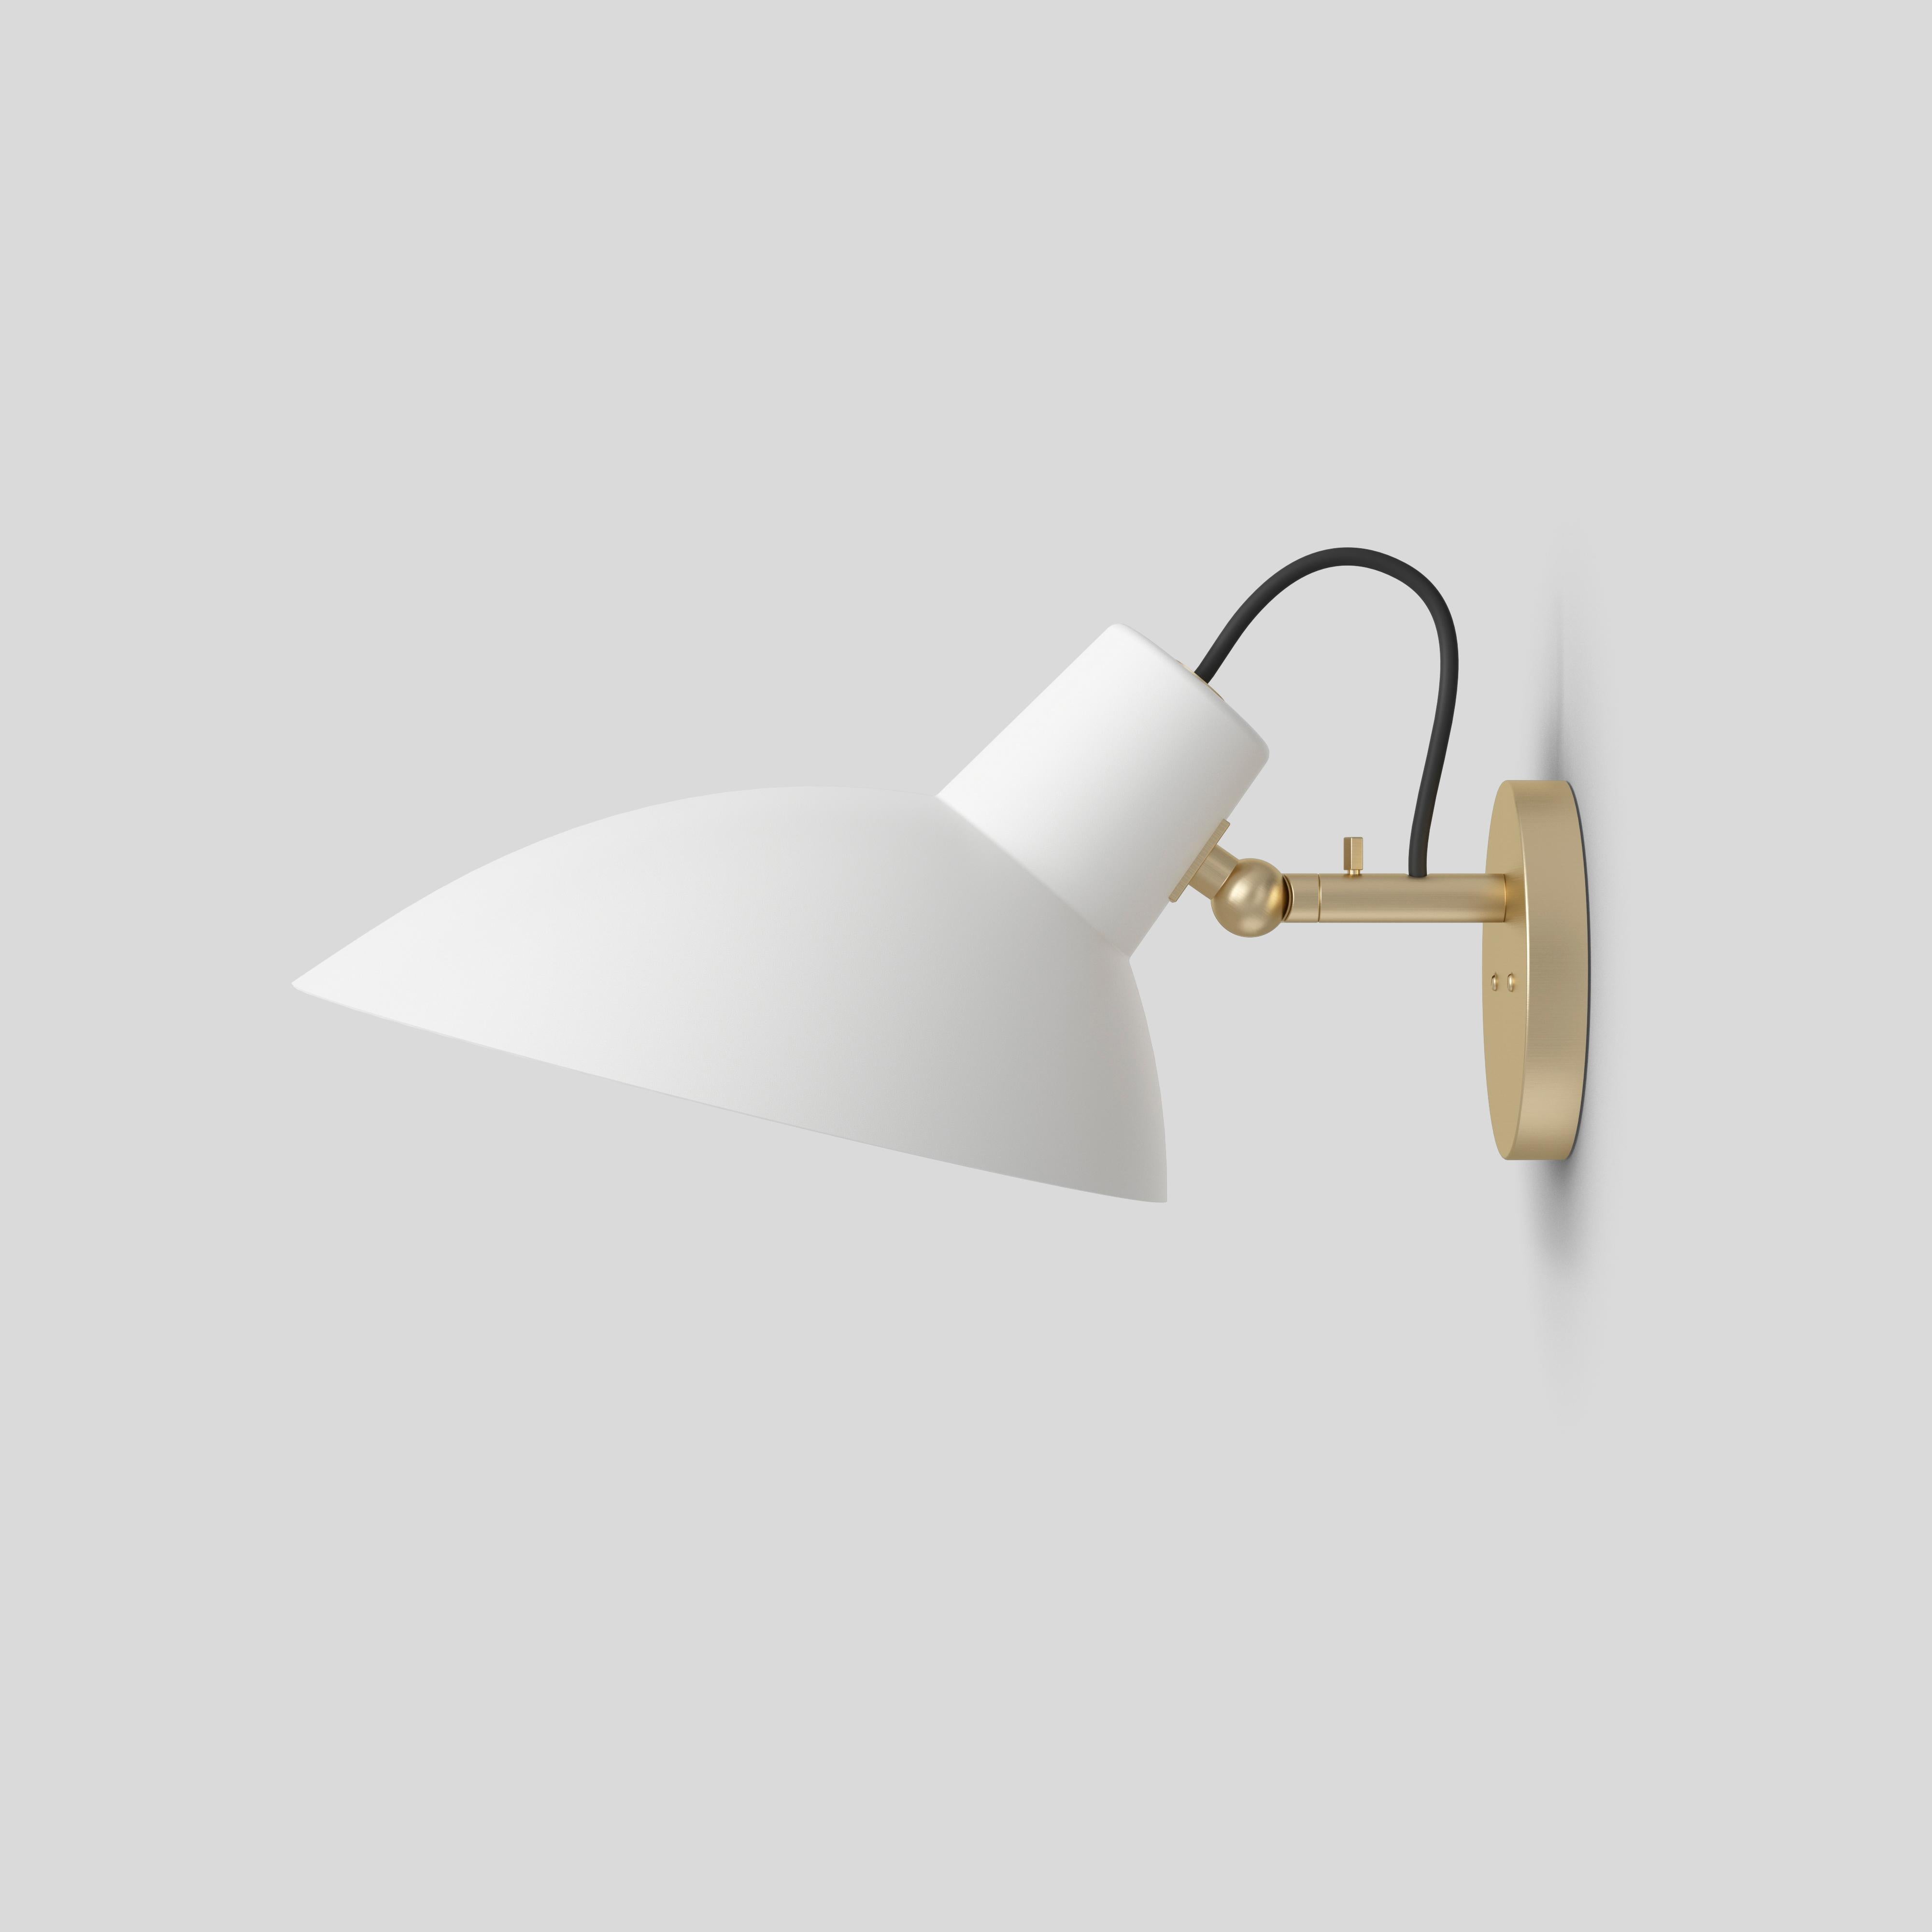 VV Cinquanta wall
Design by Vittoriano Viganò
This version is with white lacquered reflector and brass mount.

The VV Cinquanta features an elegant and versatile posable direct light source that can swivel and tilt. The Wall model is mounted on